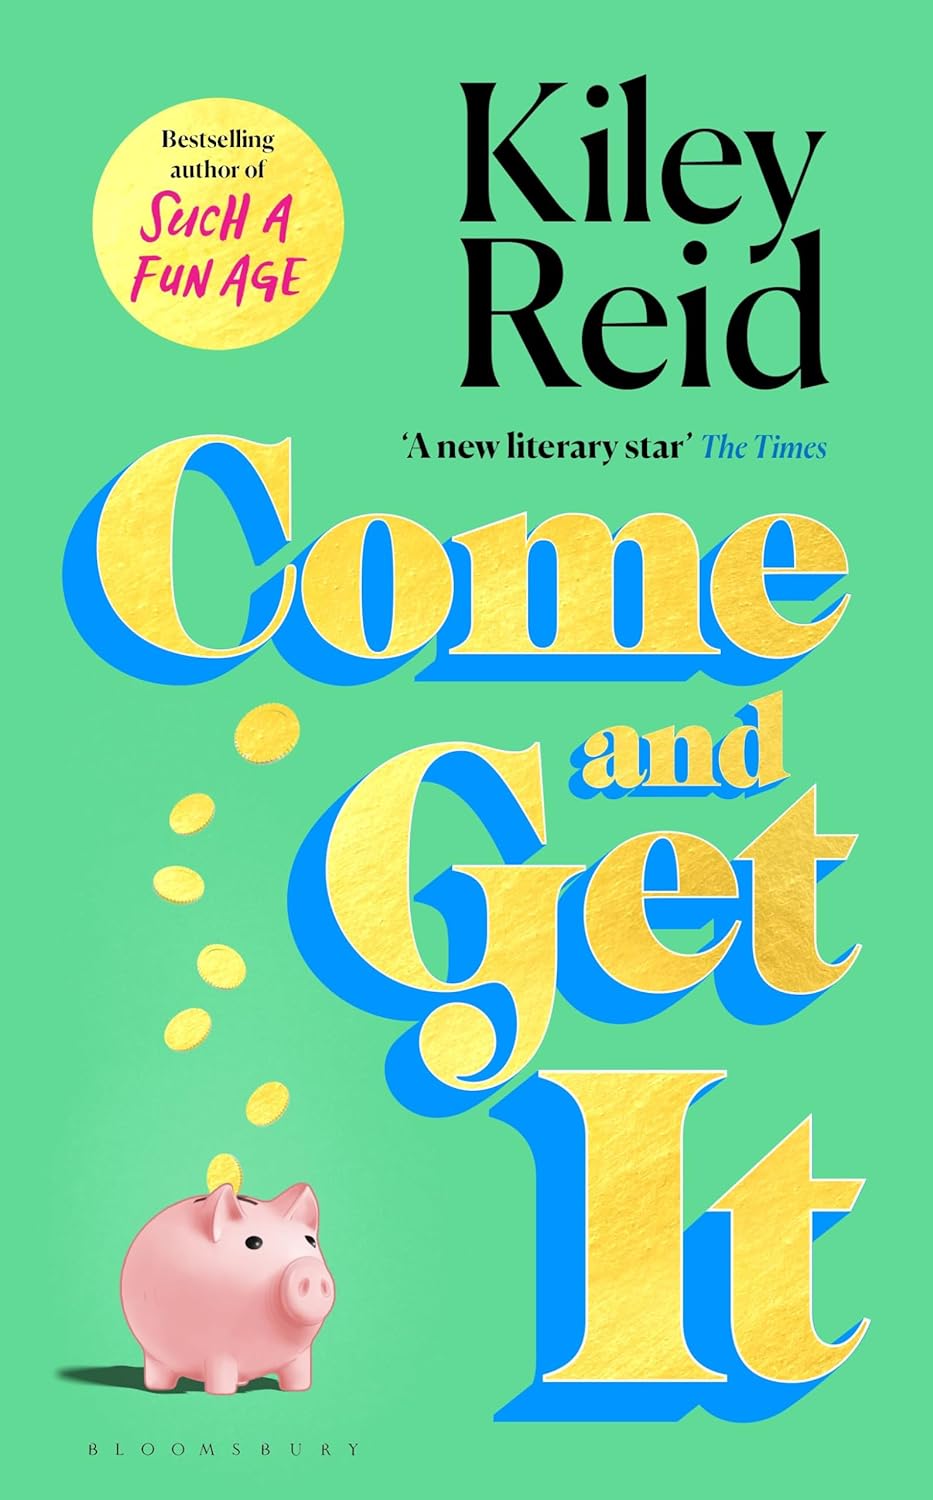 Come and Get It by Kiley Reid (HC)